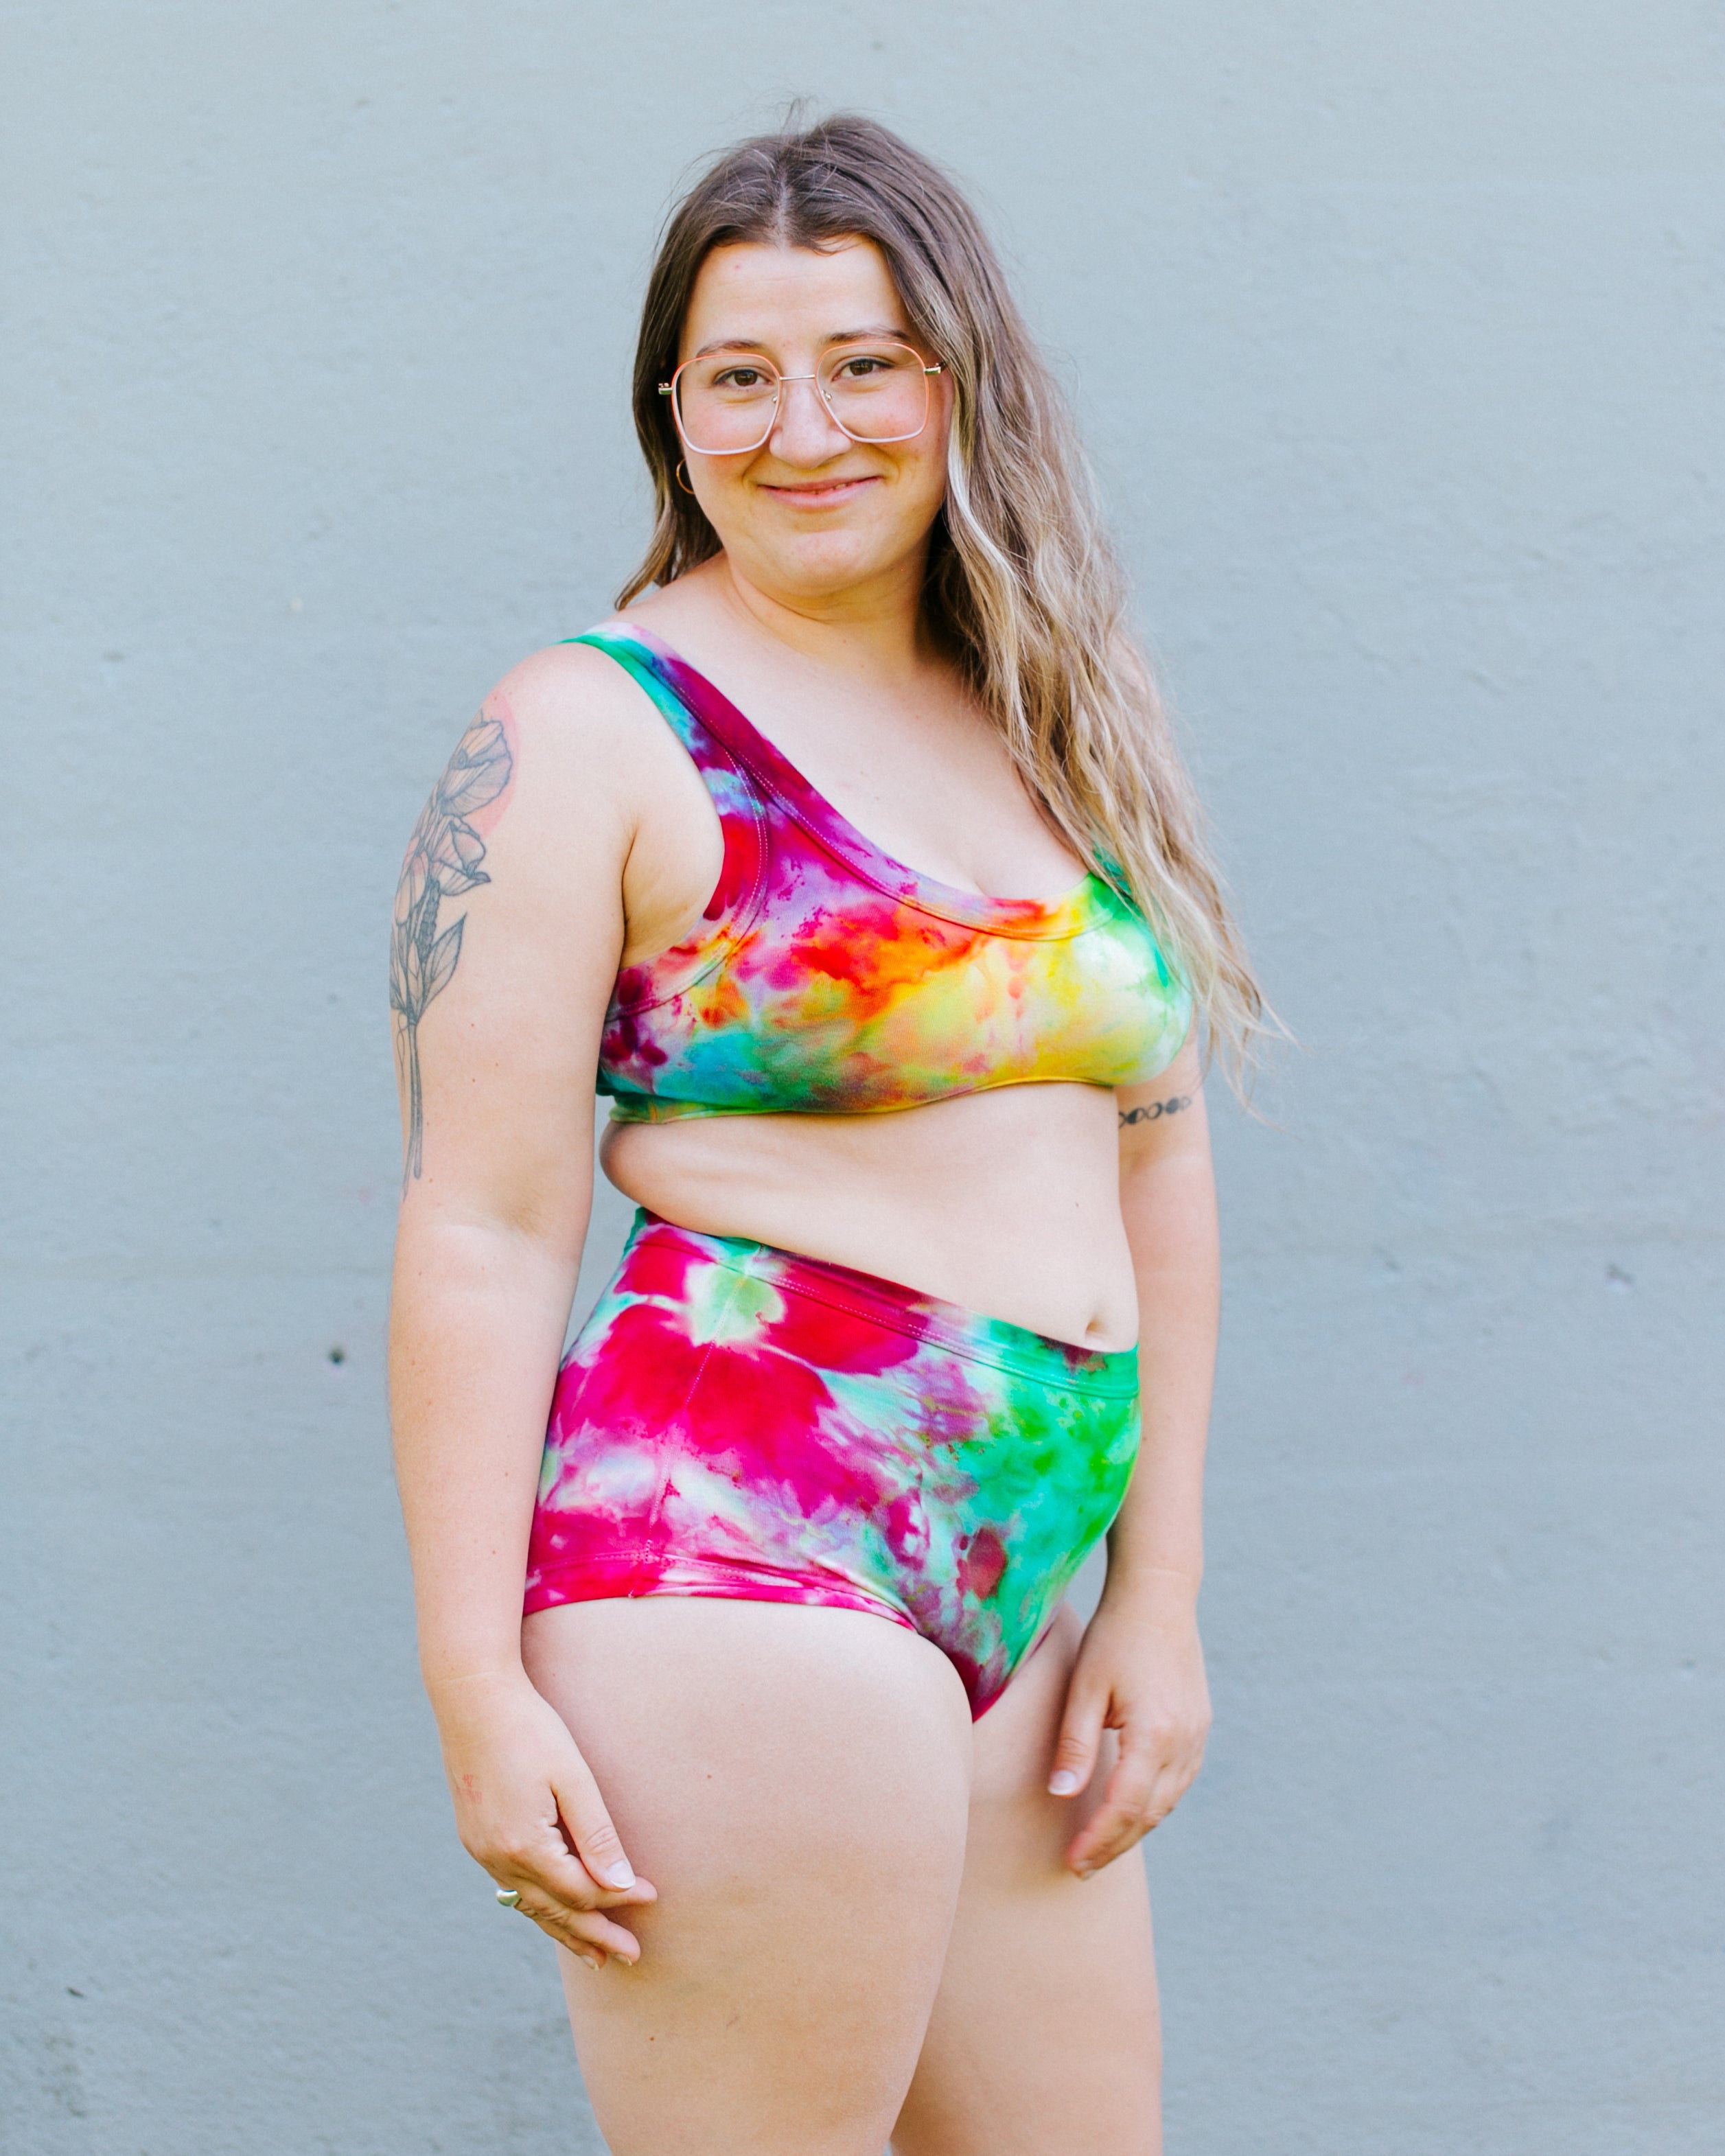 Model wearing Ice Dyed set of Original style underwear and Bralette in a mix of pink, green, and yellow colors.